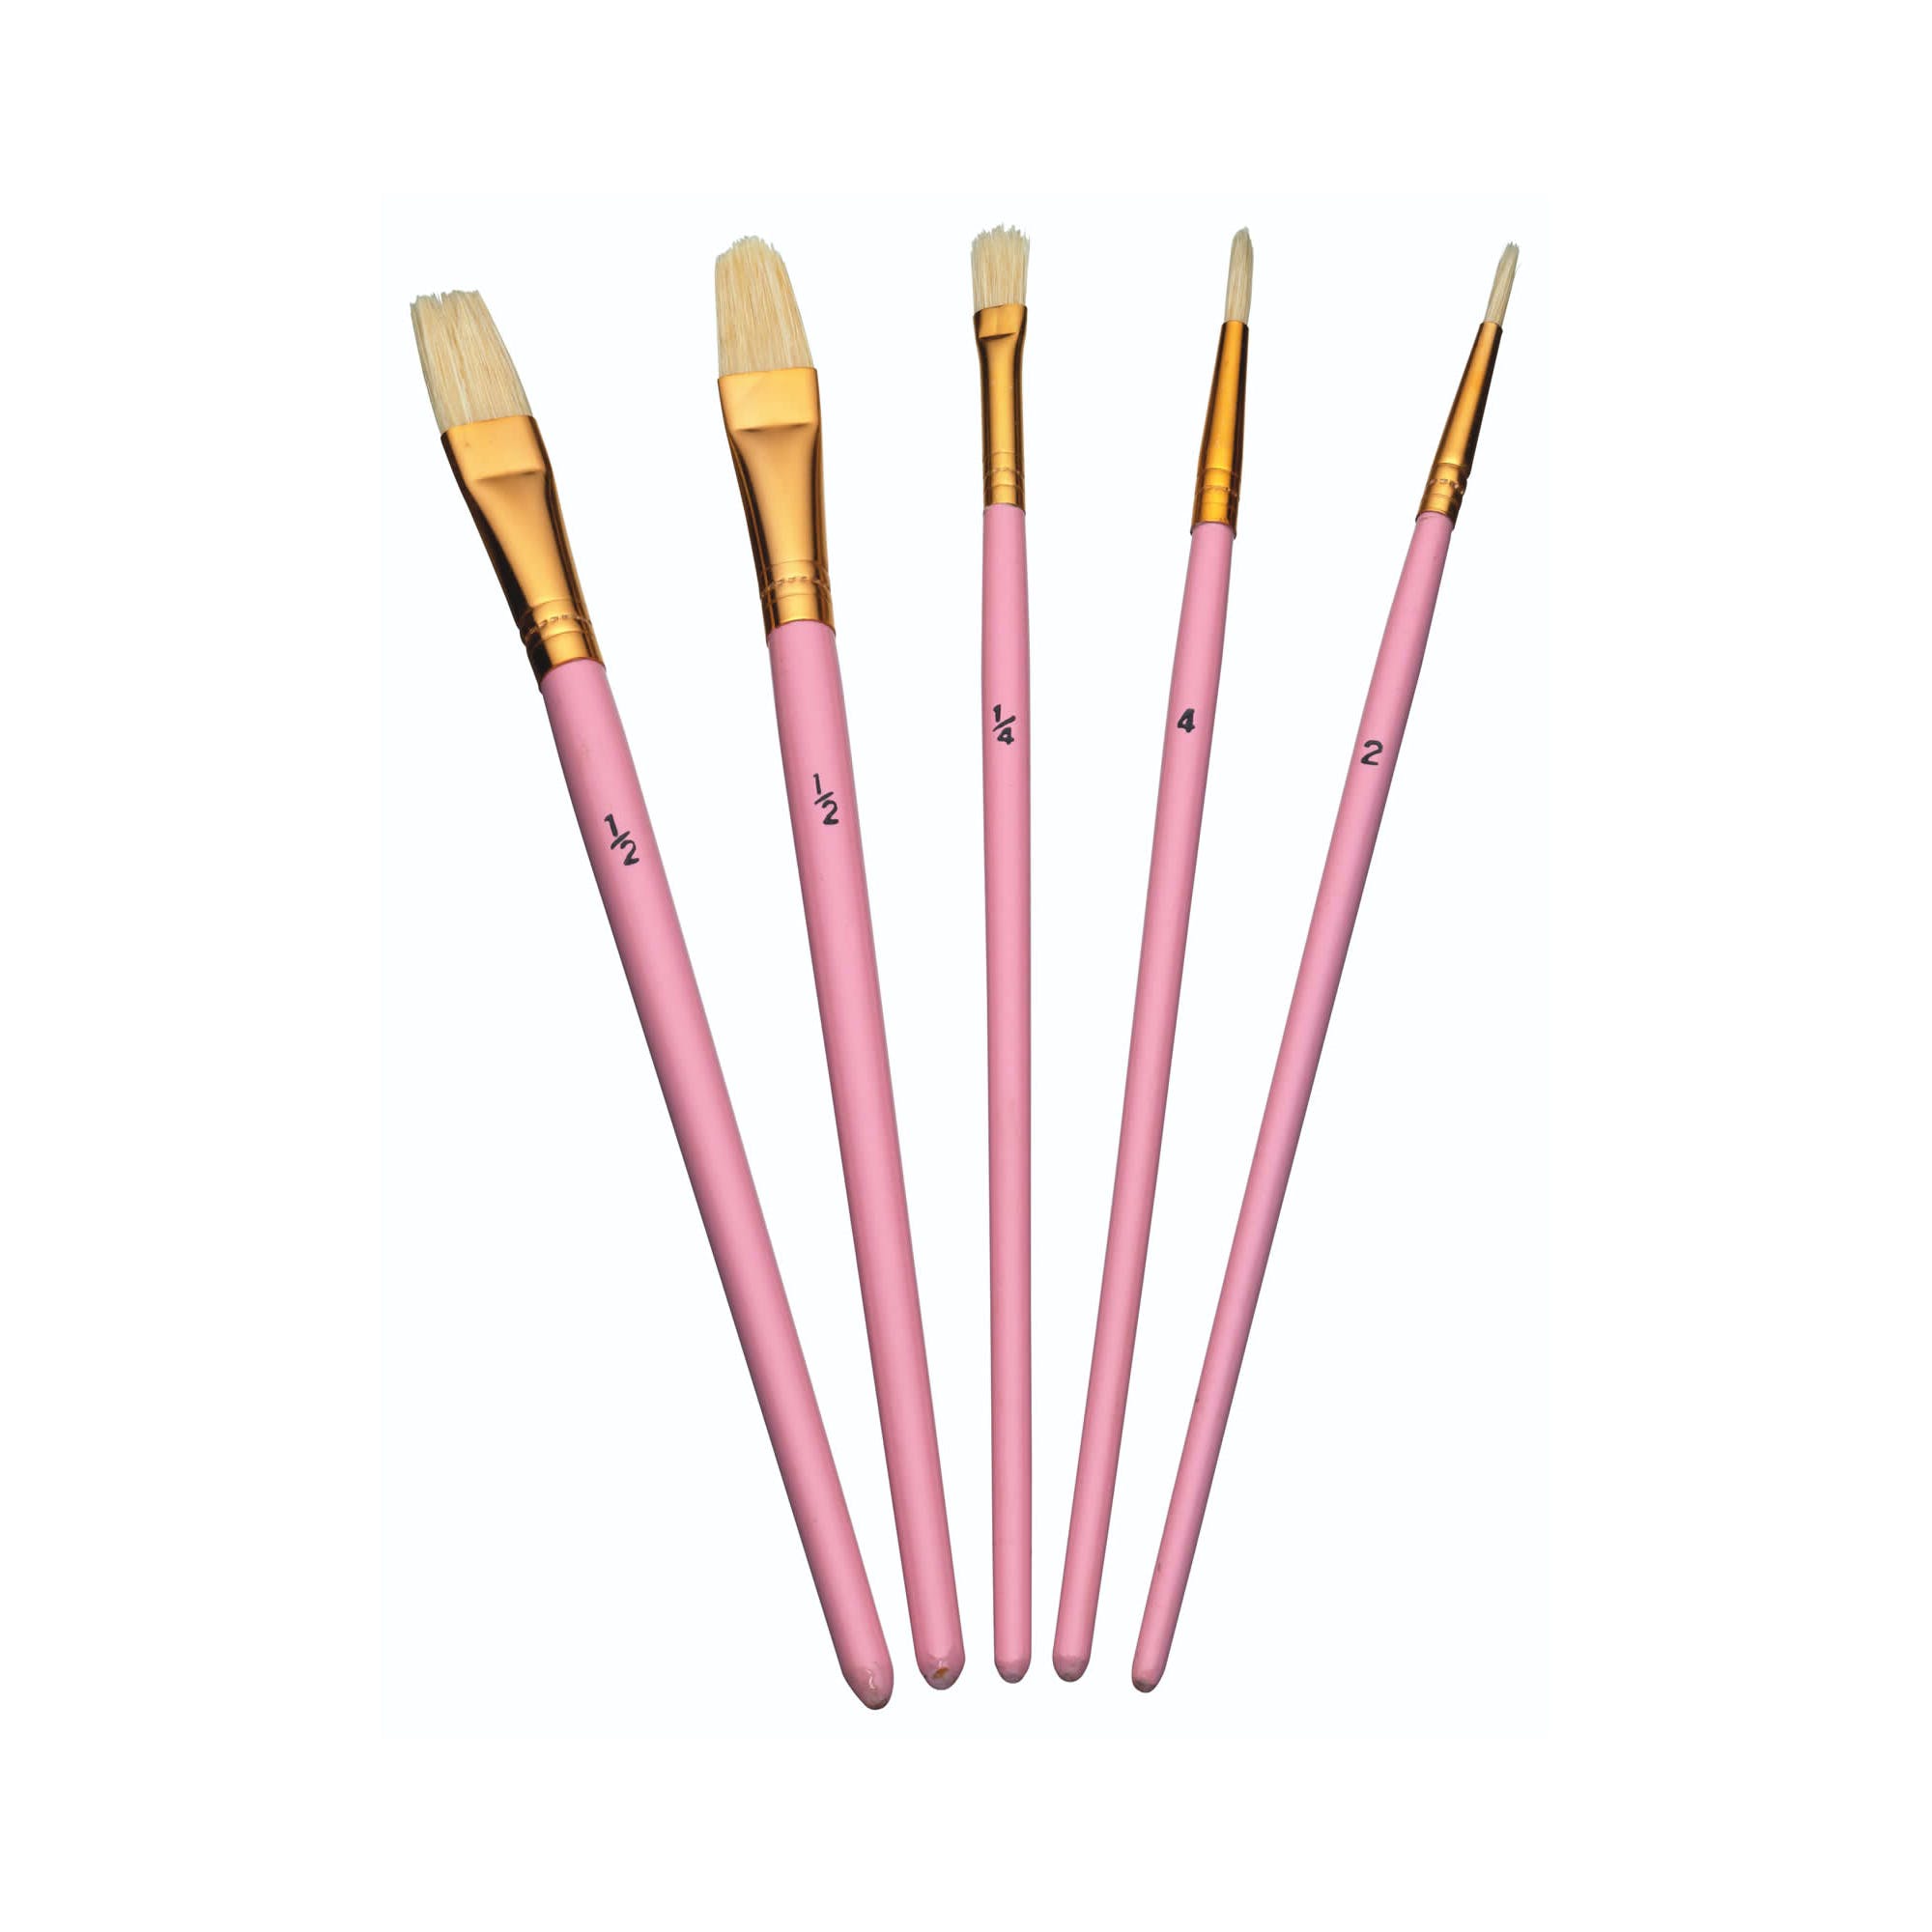 Sweetly Does It Pack of 5 Sugarcraft Decorating Brushes - The Cooks Cupboard Ltd